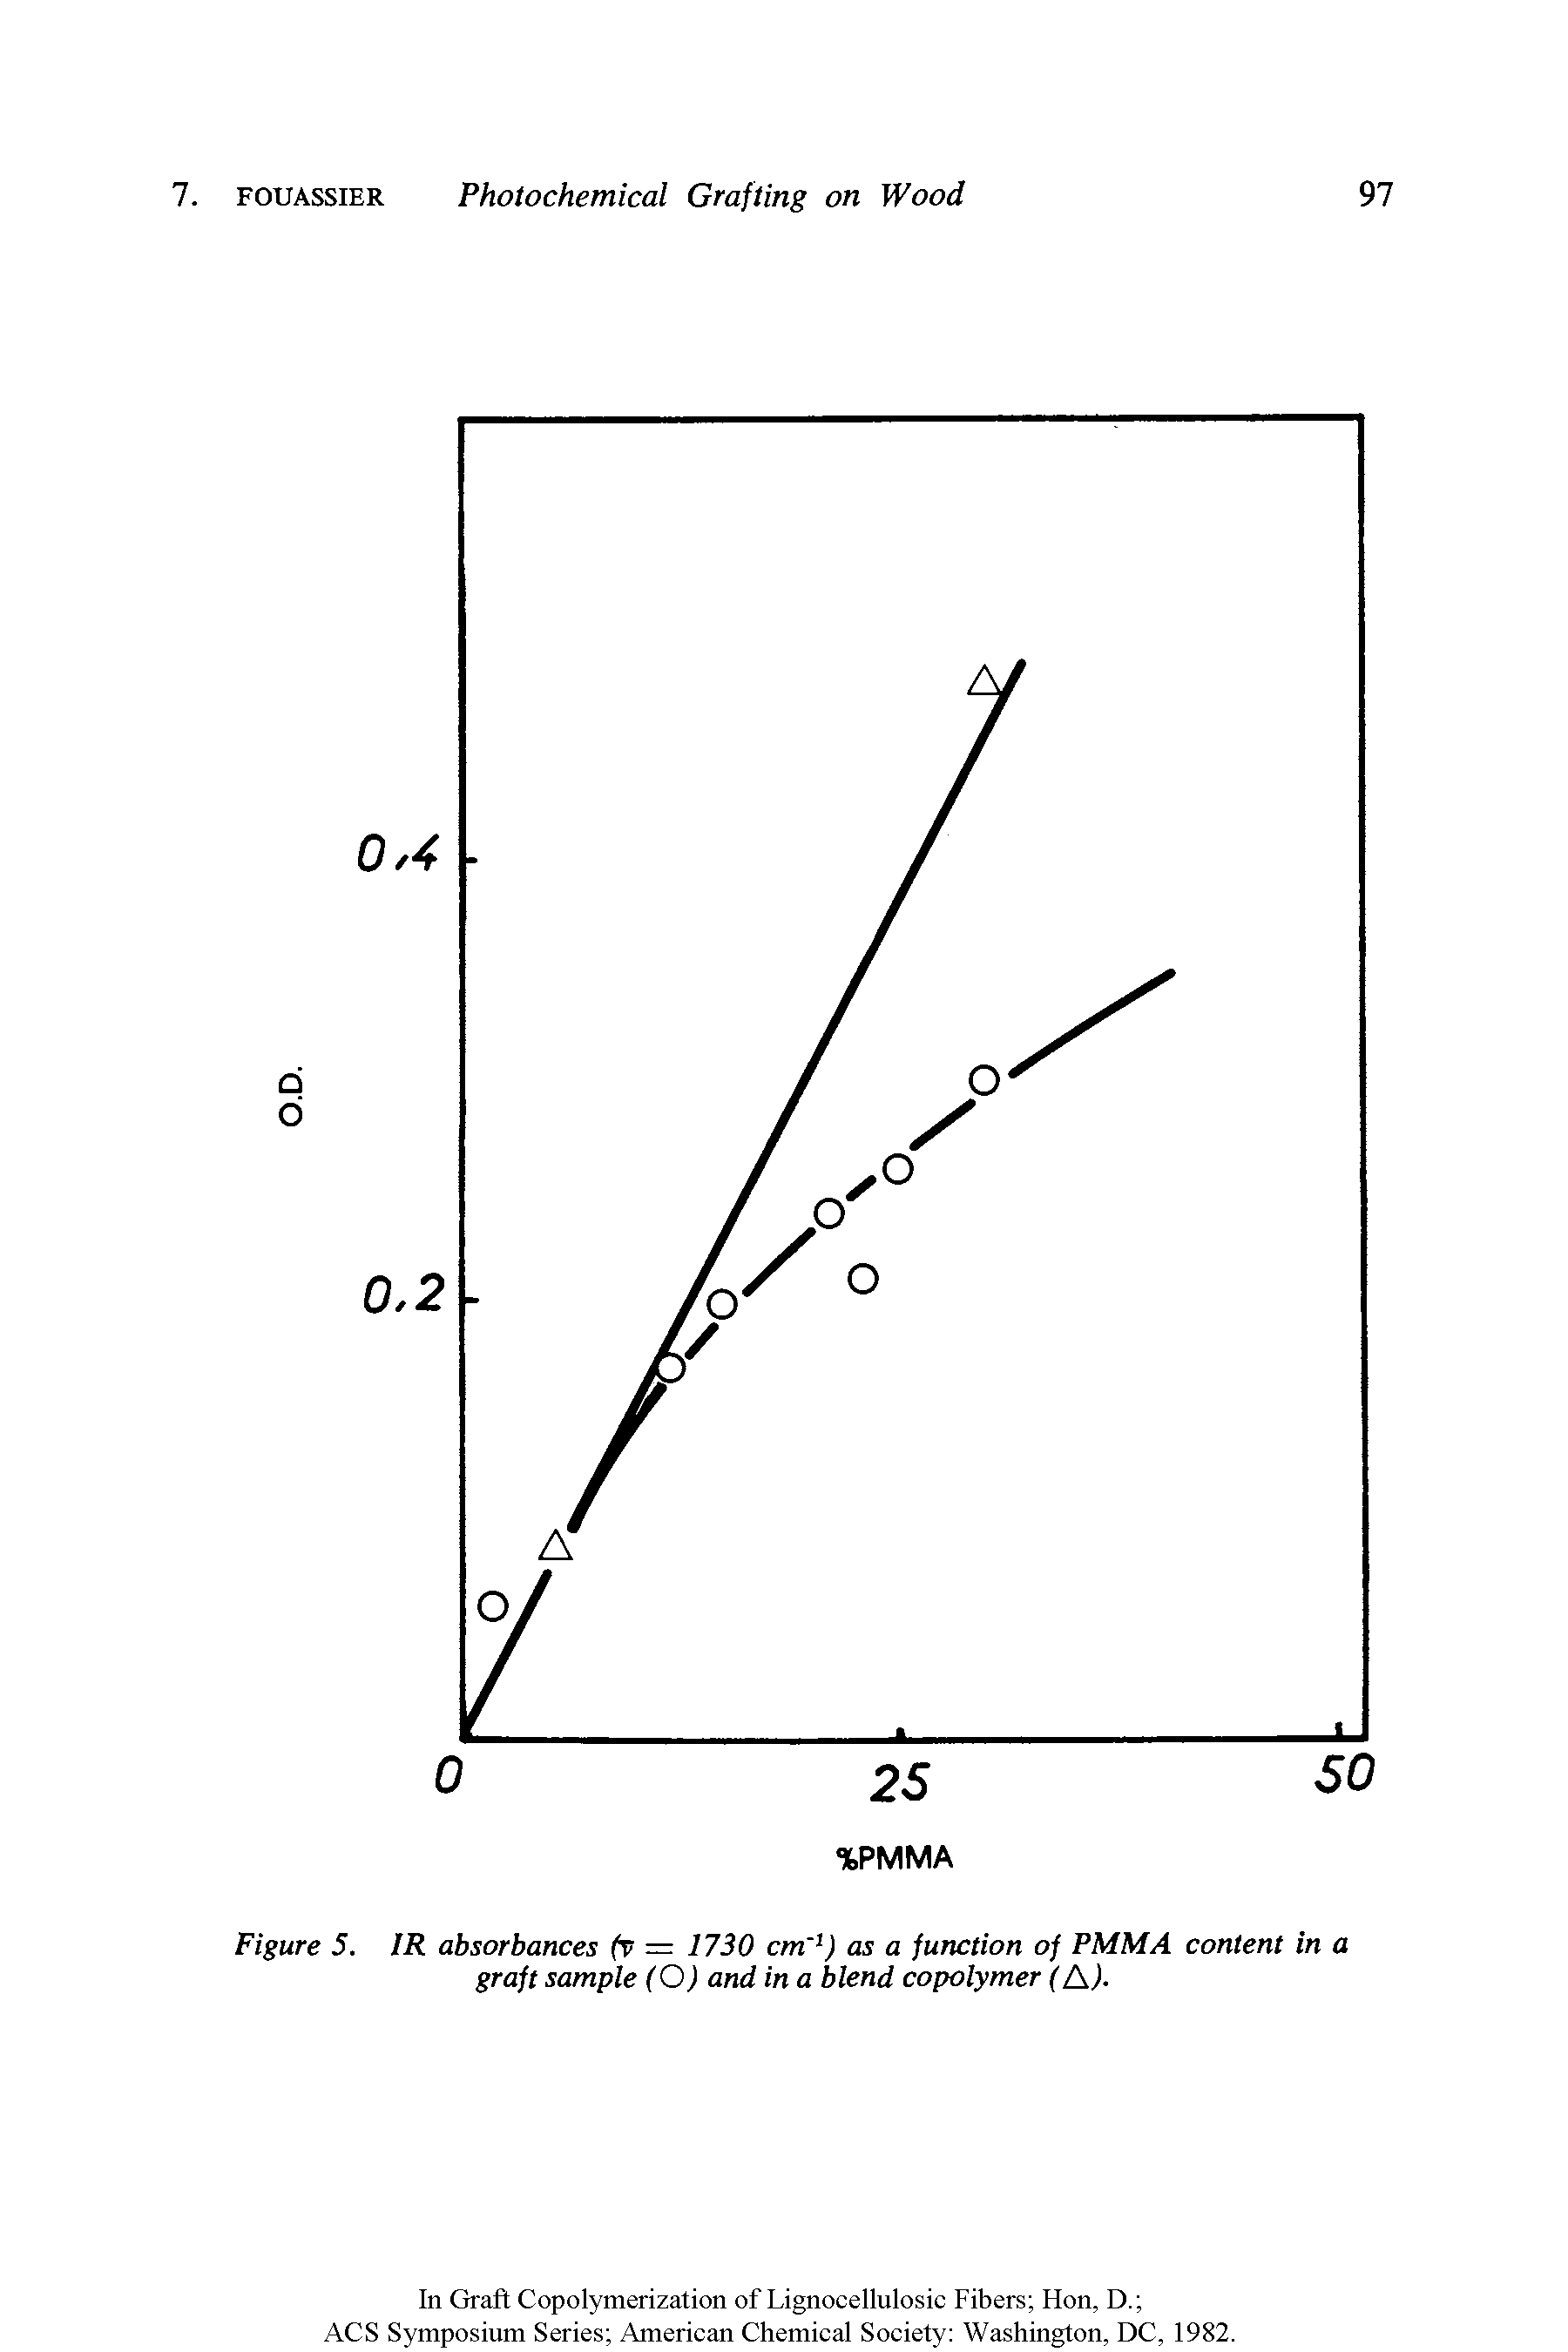 Figure 5. IR absorbances (v = 1730 cm 1) as a function of PMMA content in a graft sample (O) and in a blend copolymer (A).